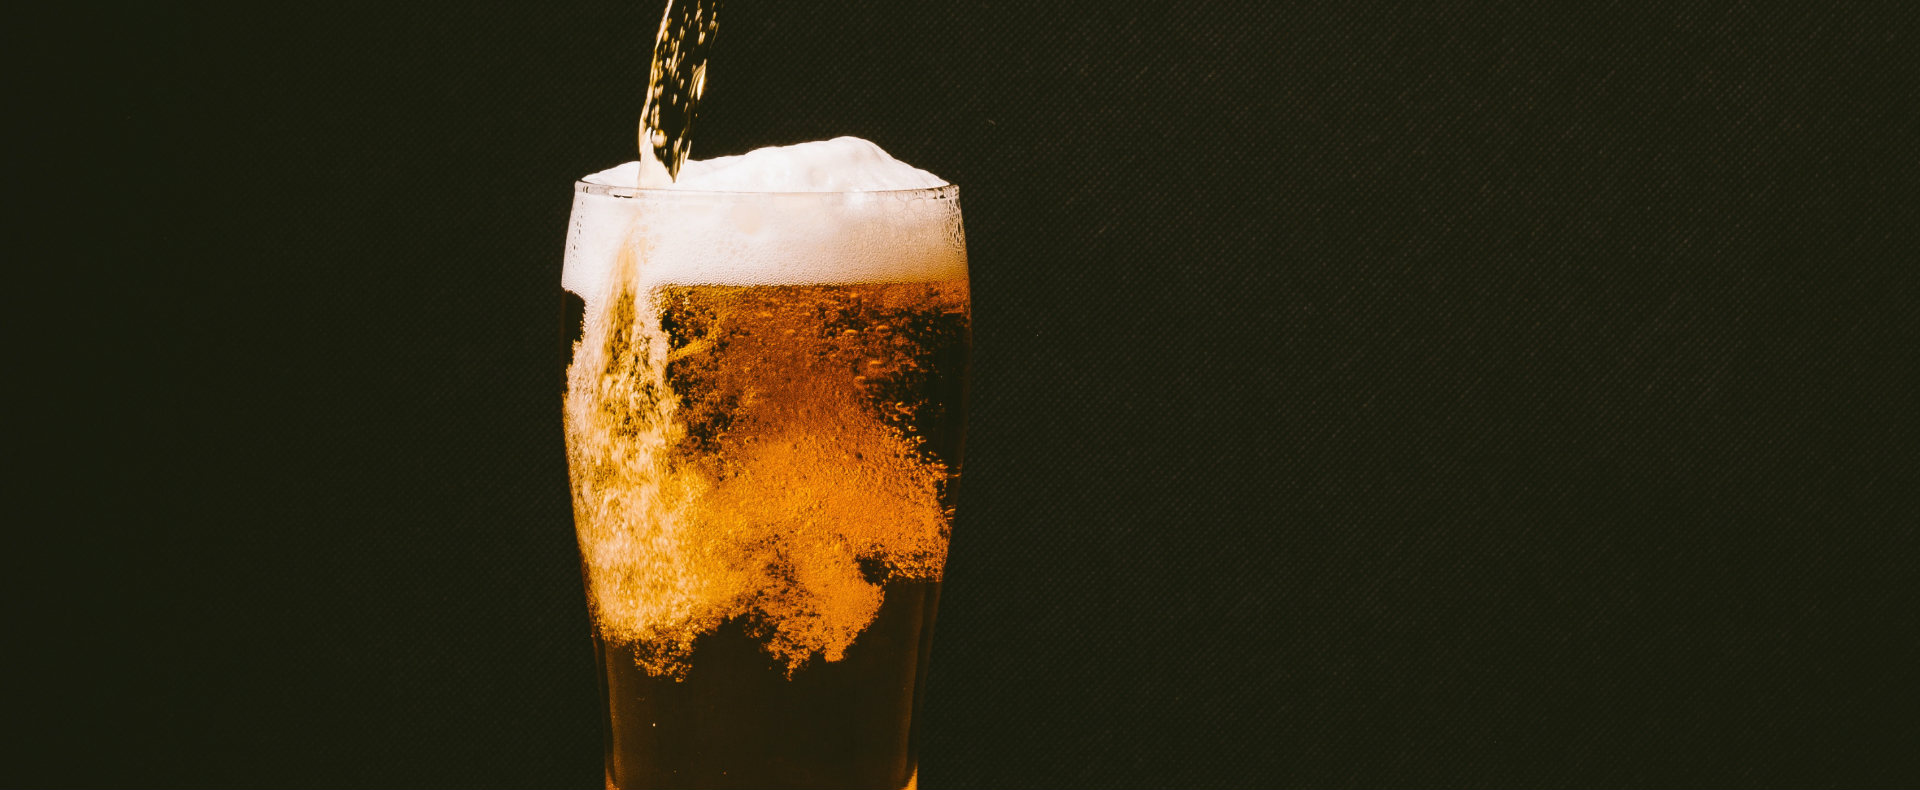 Raise A Glass To International Beer Day At The Montagu Arms